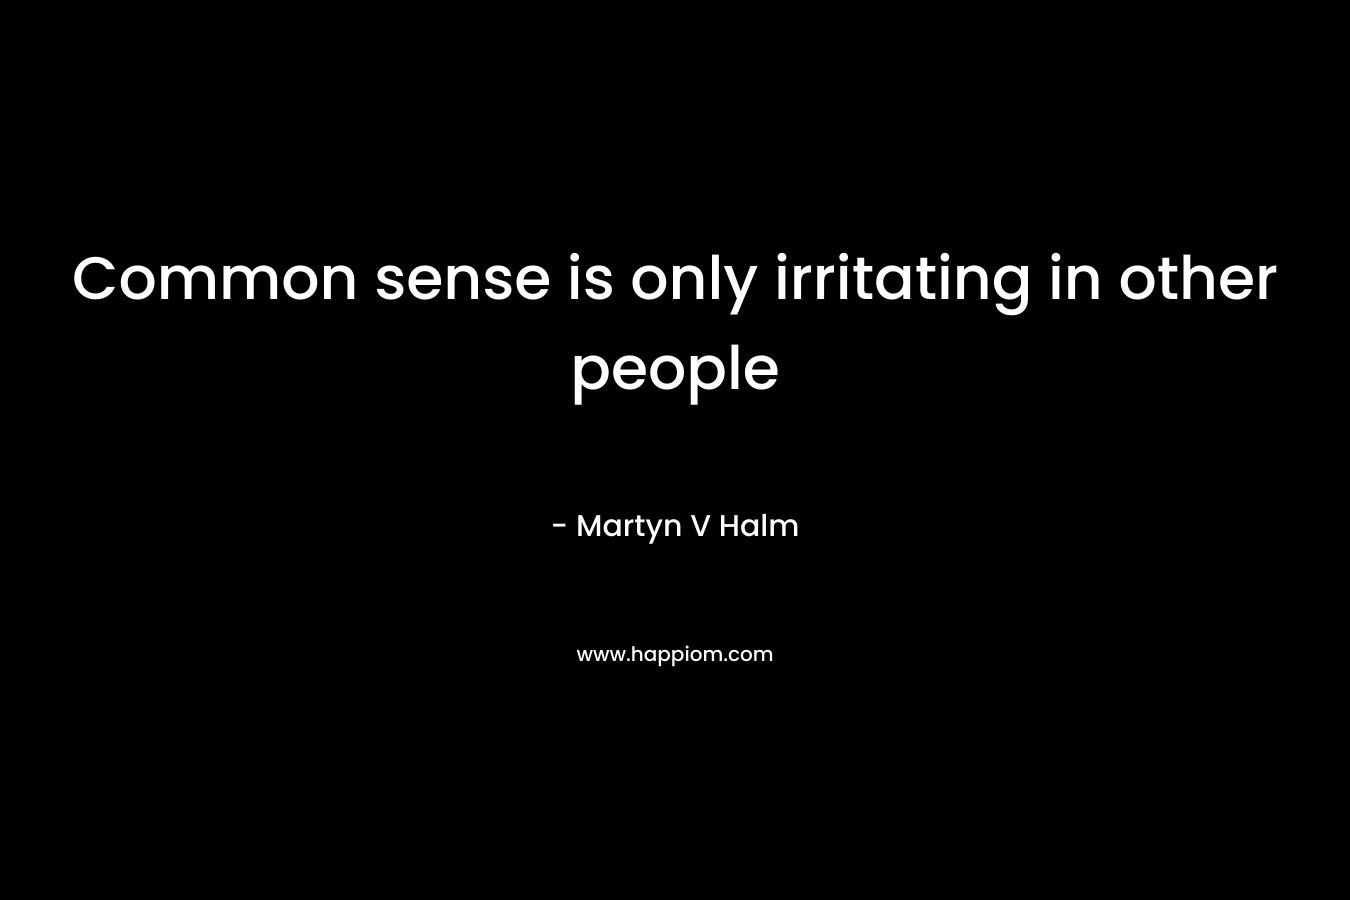 Common sense is only irritating in other people